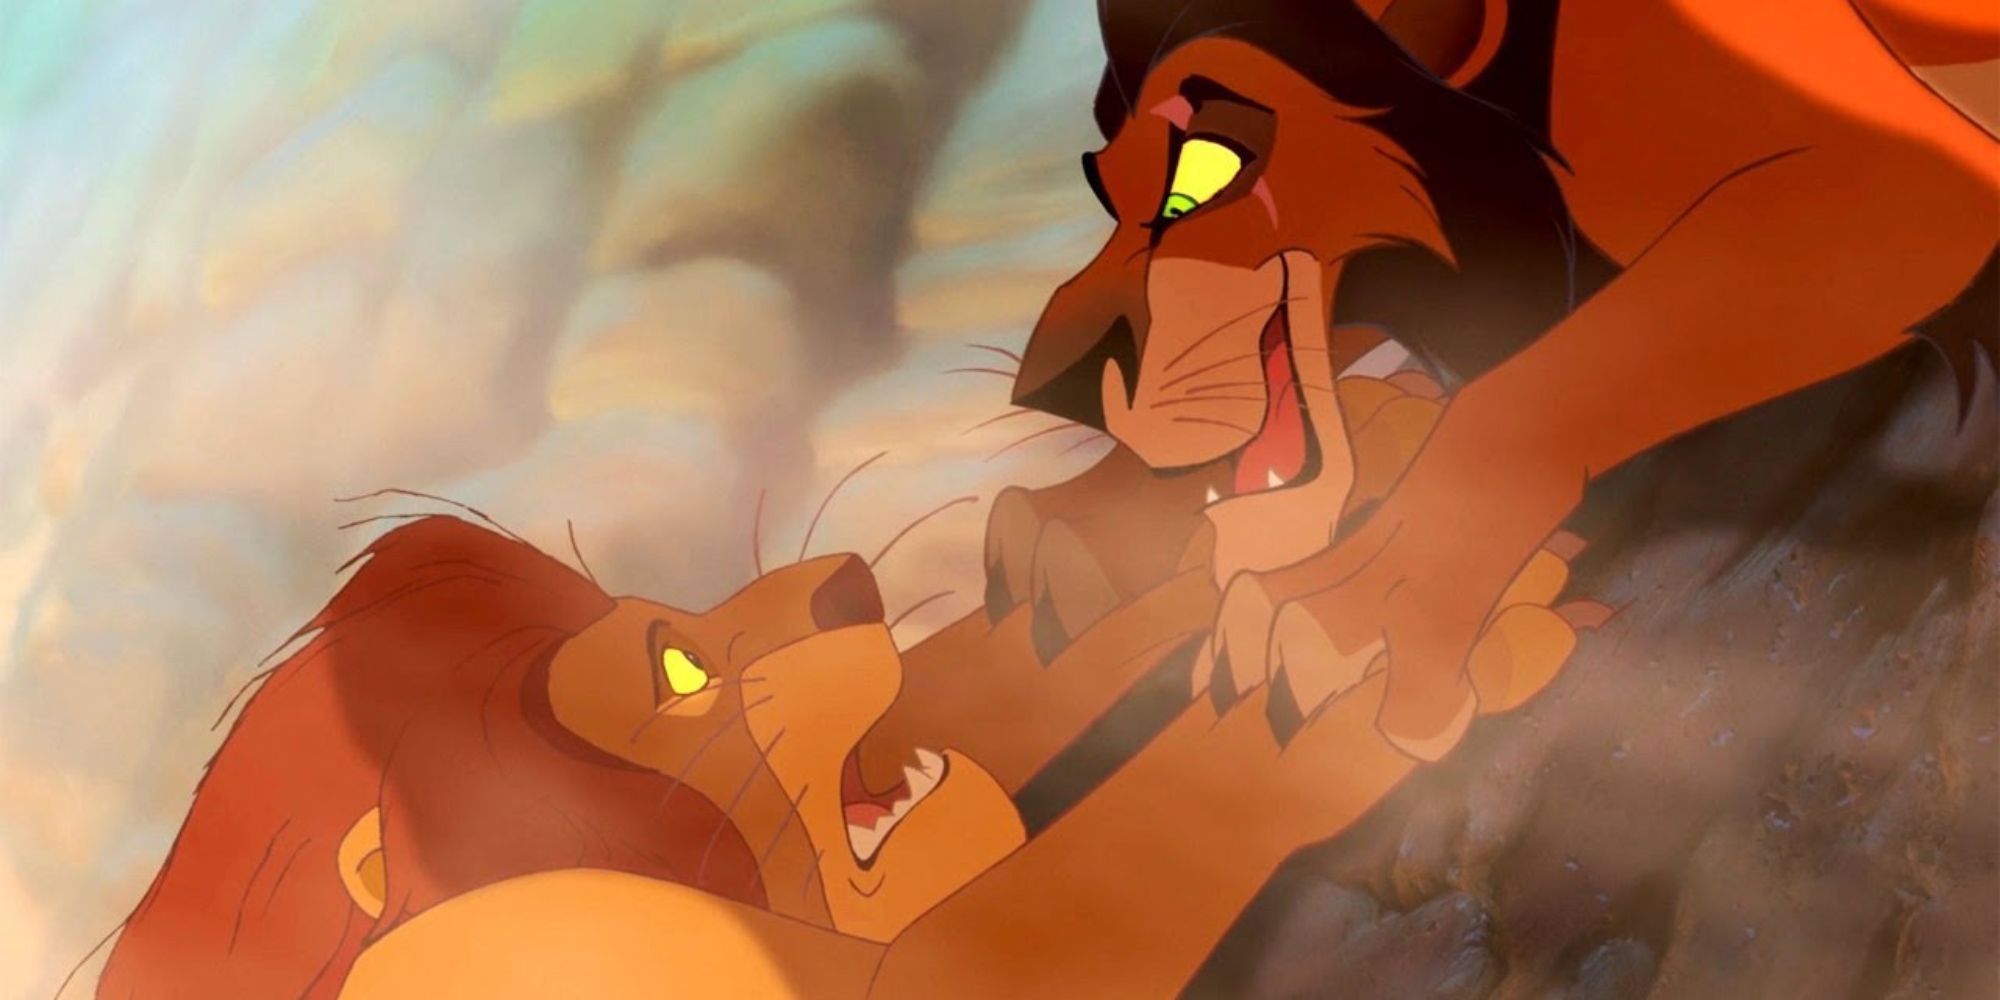 Scar sneers as he digs his claws into Mufasa's paws, ready for the kill